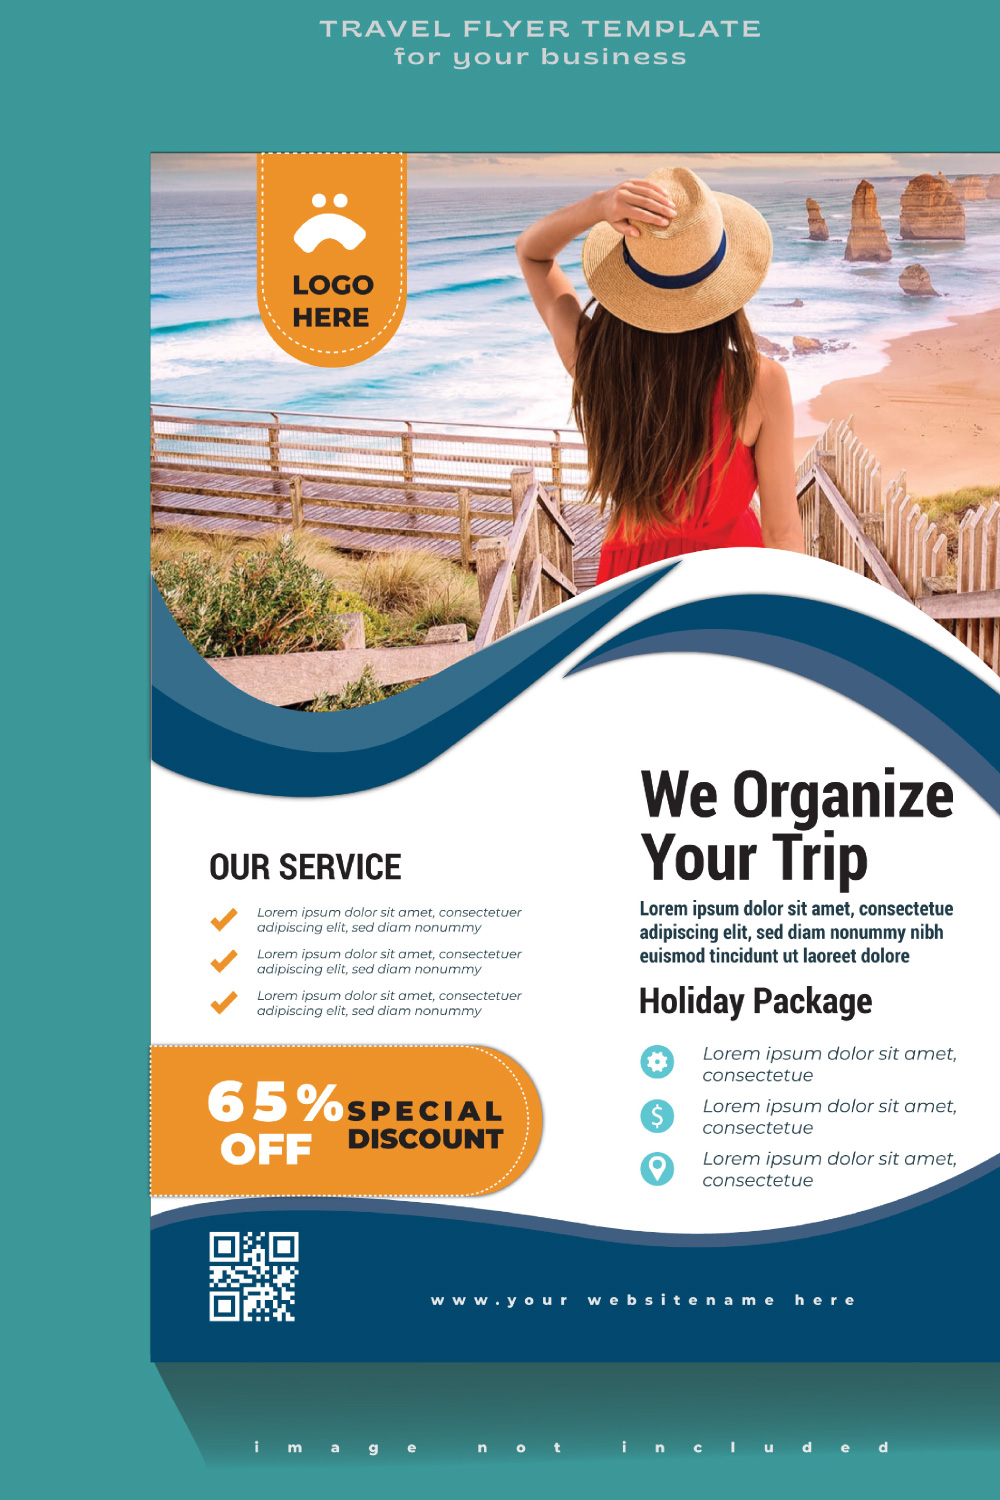 travel tour flyer template for your business travel flyer design travel flyer template pinterest preview image.